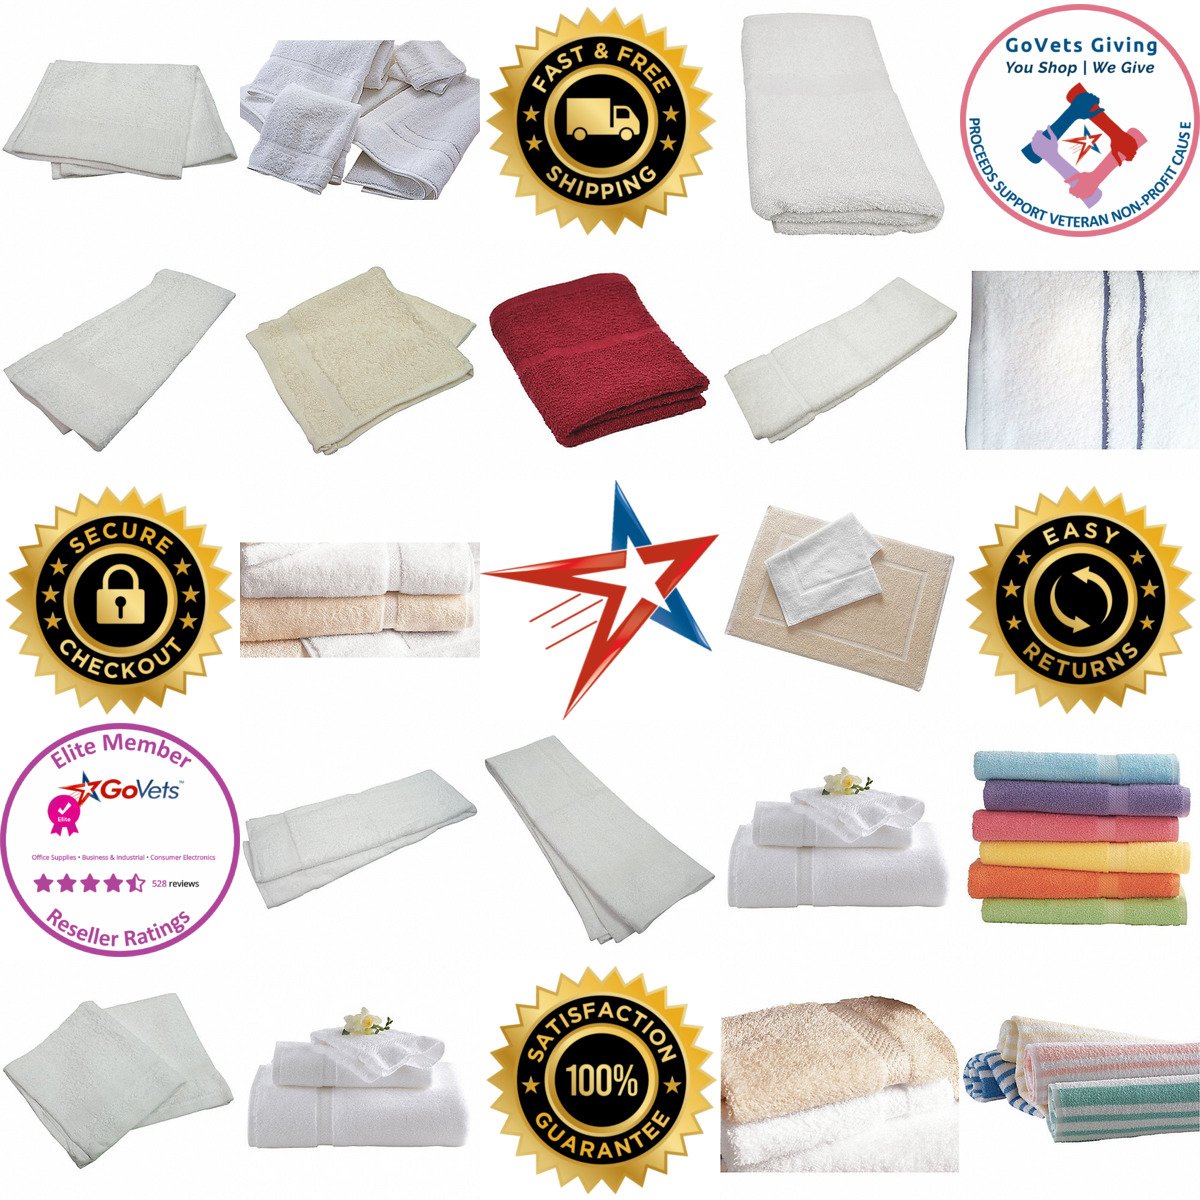 A selection of Towels products on GoVets